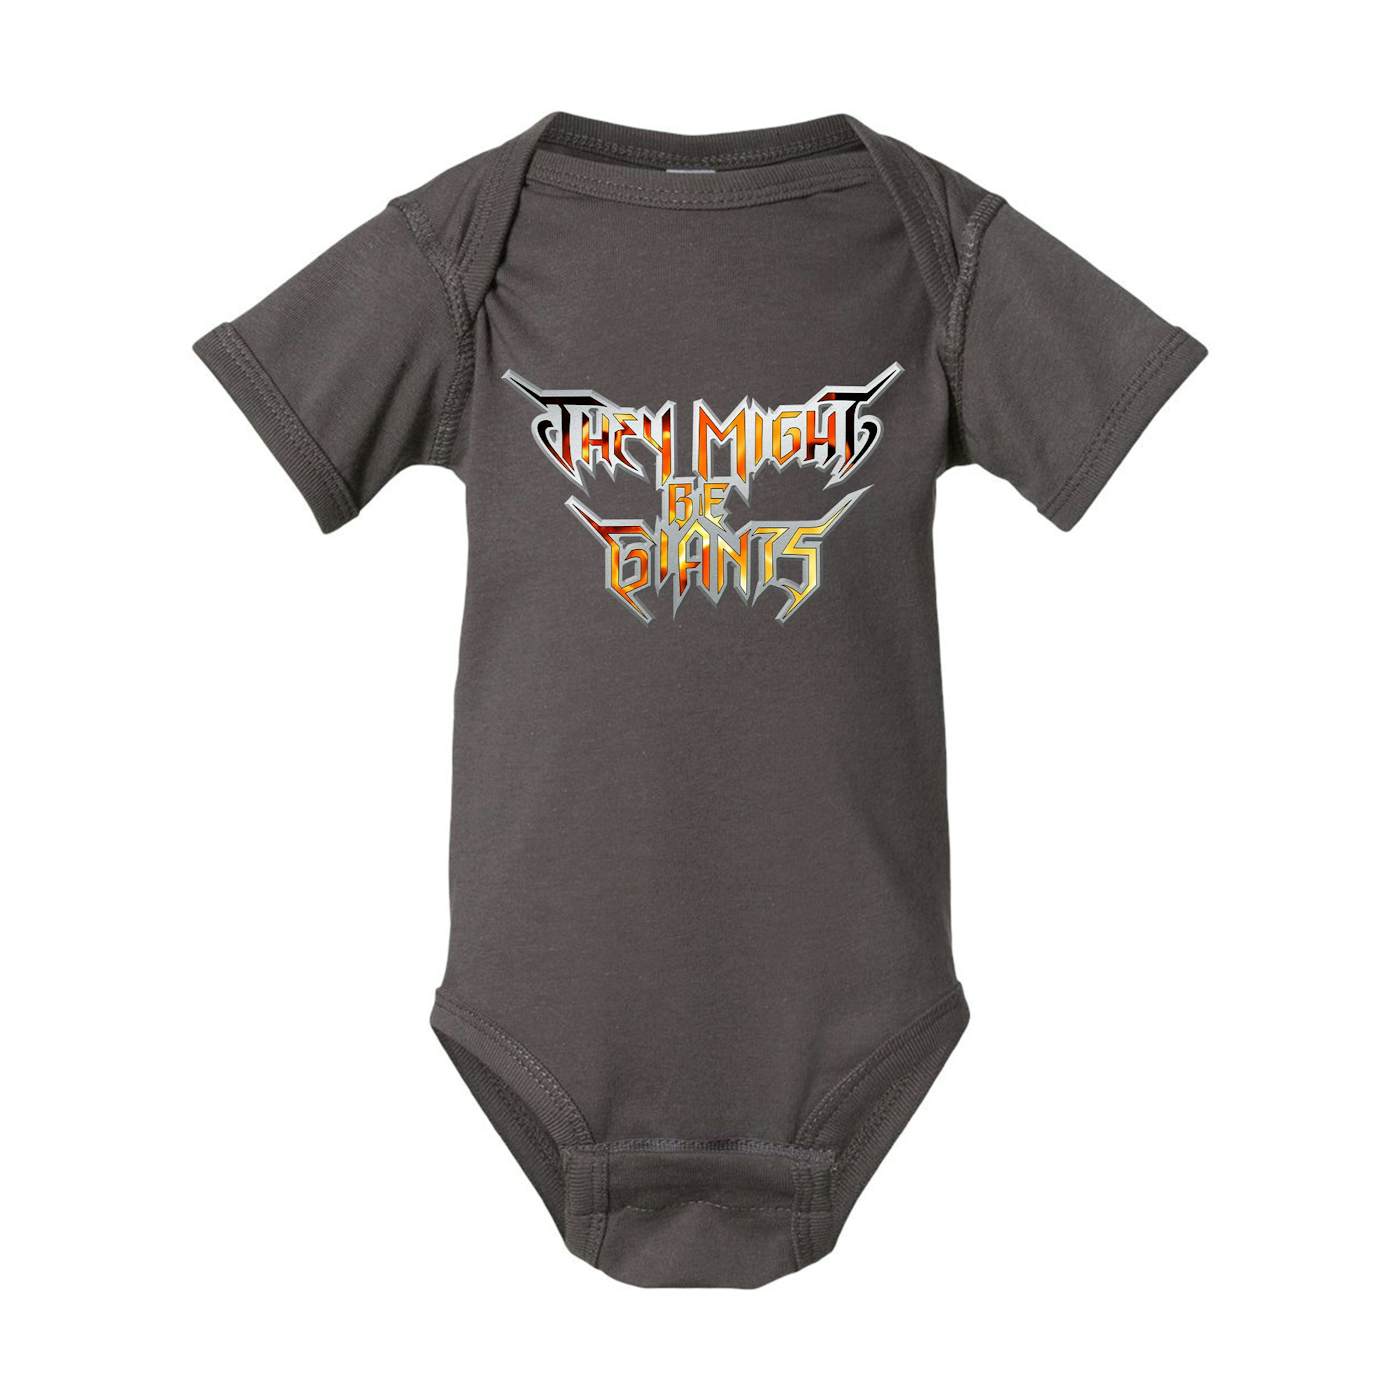 They Might Be Giants Metal Onesie